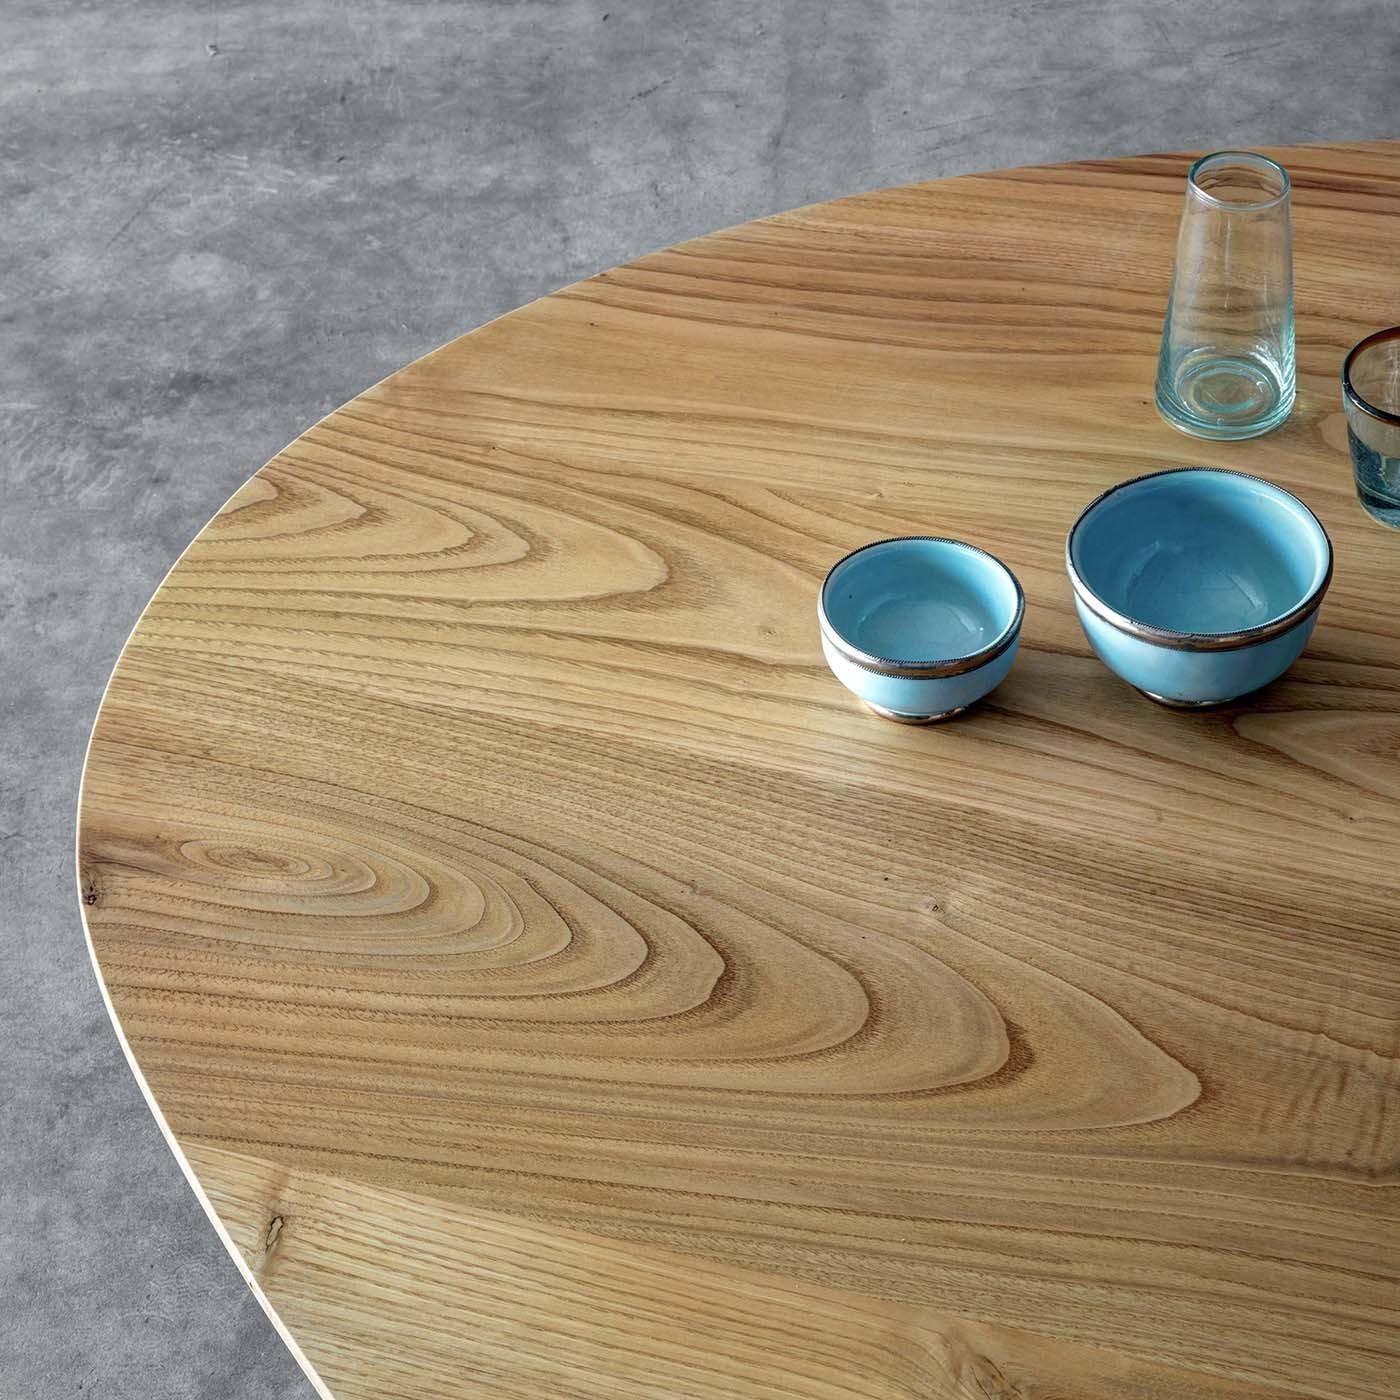 Designed by Act_Romegialli, this elegant coffee table will be the focal point of a modern or rustic interior, thanks to its superb solid walnut top and its unique silhouette. Shaped as an asymmetrical egg with tapered edges, the top is visually